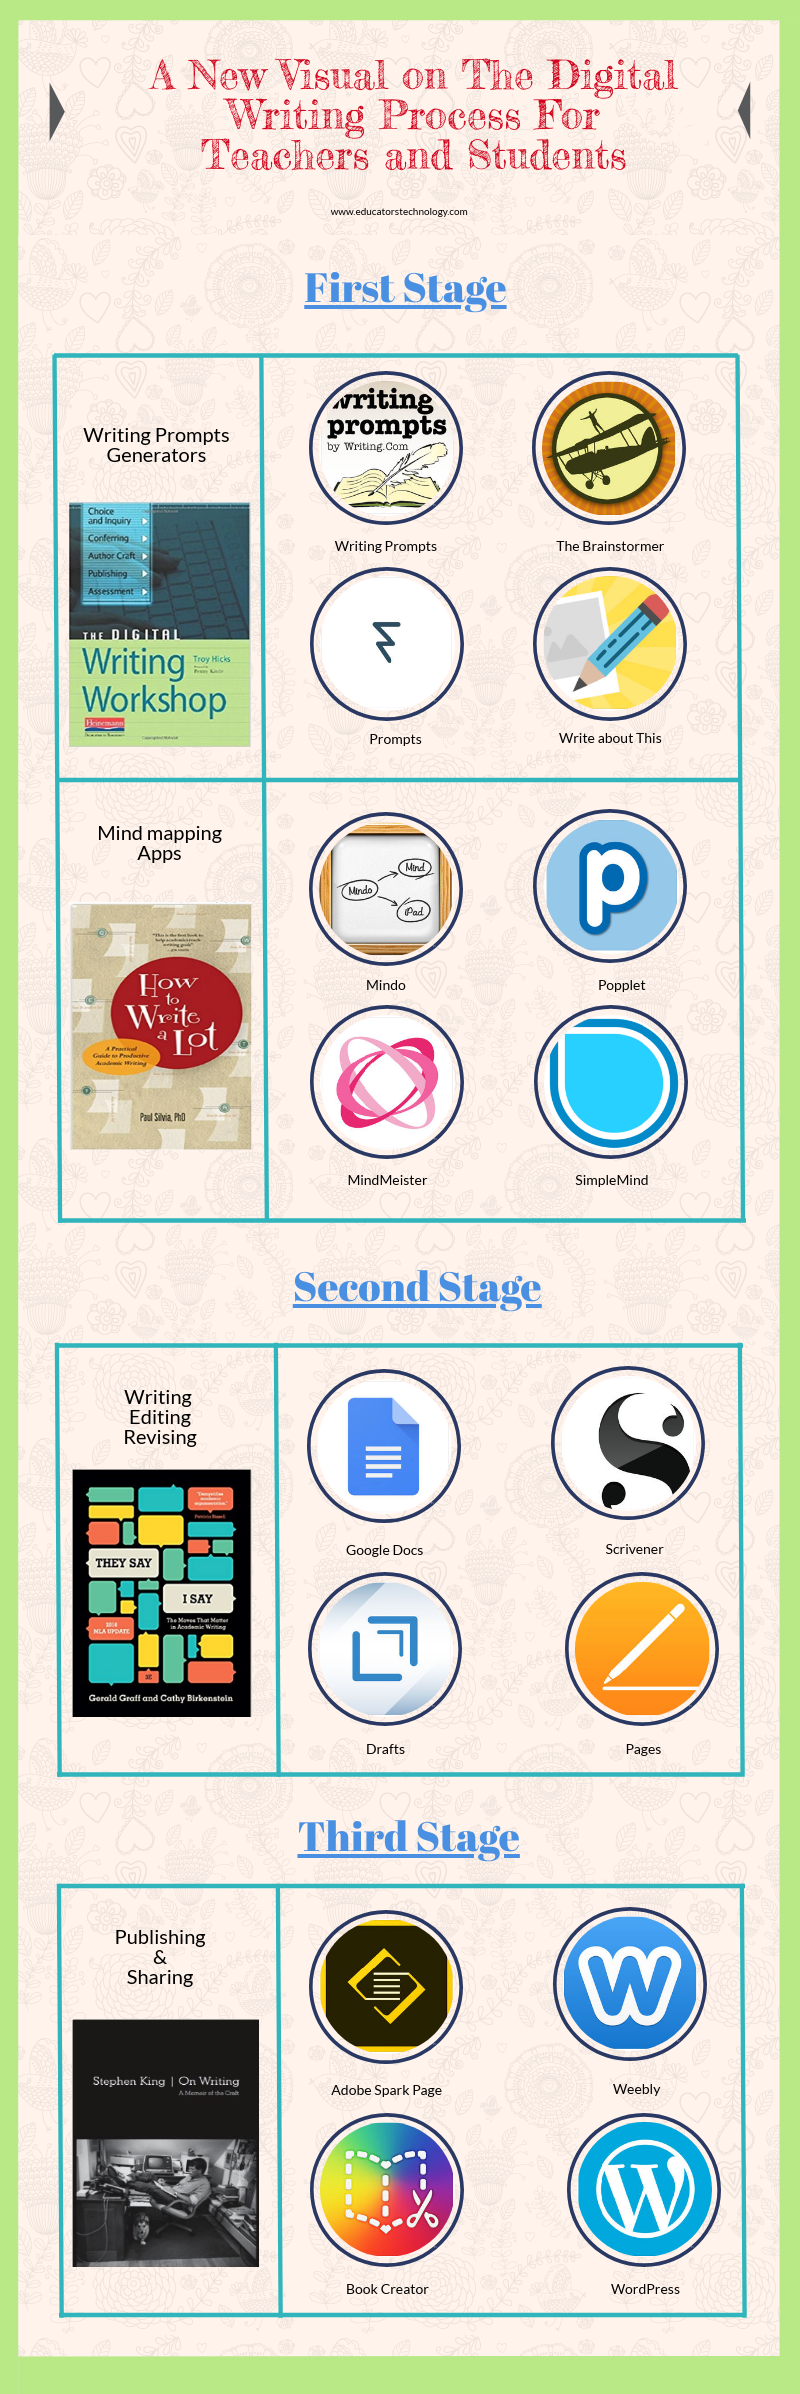 A New Visual on The Digital Writing Process For Teachers and Students